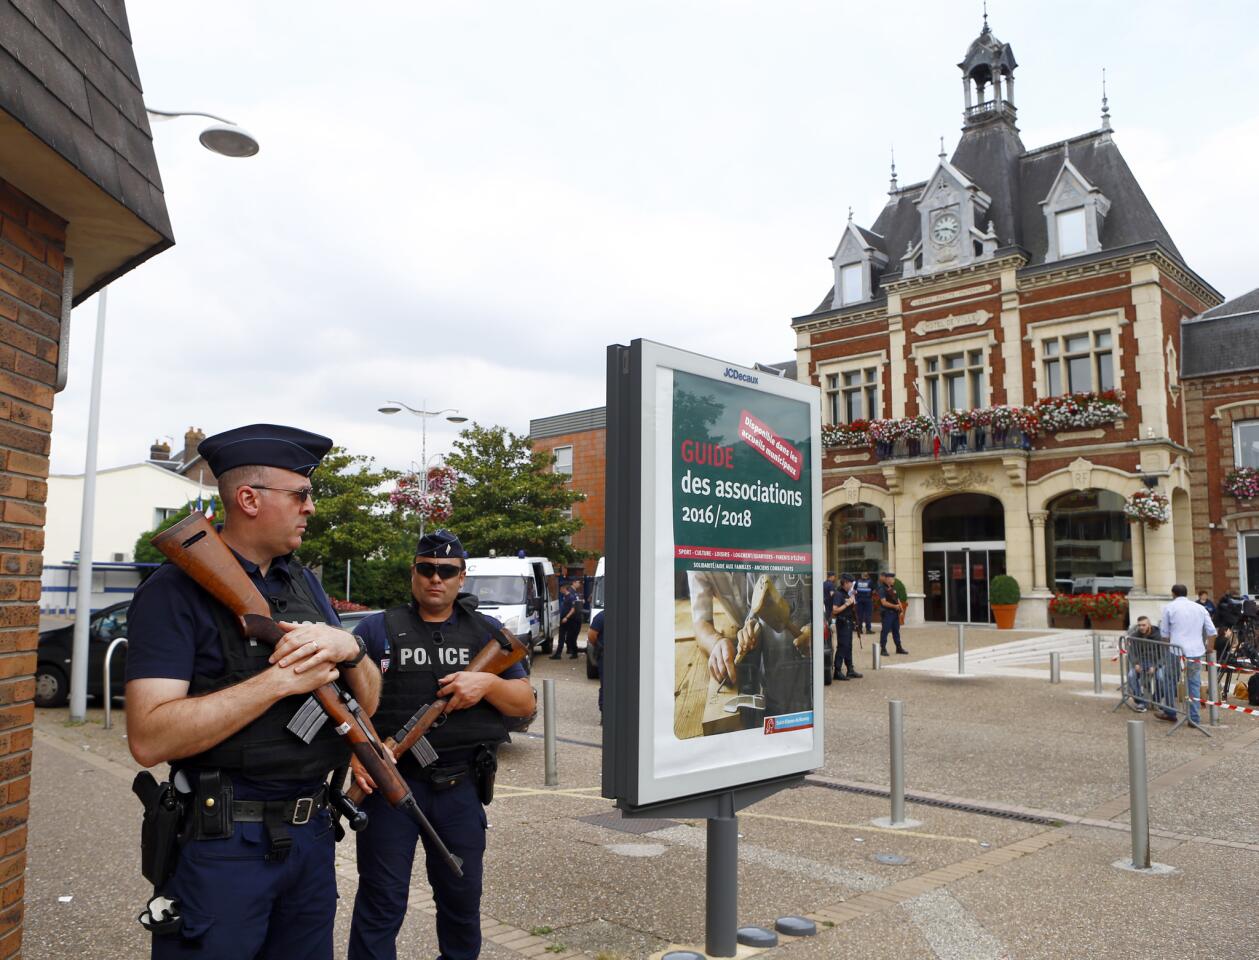 Attackers with knives kill priest in northern France